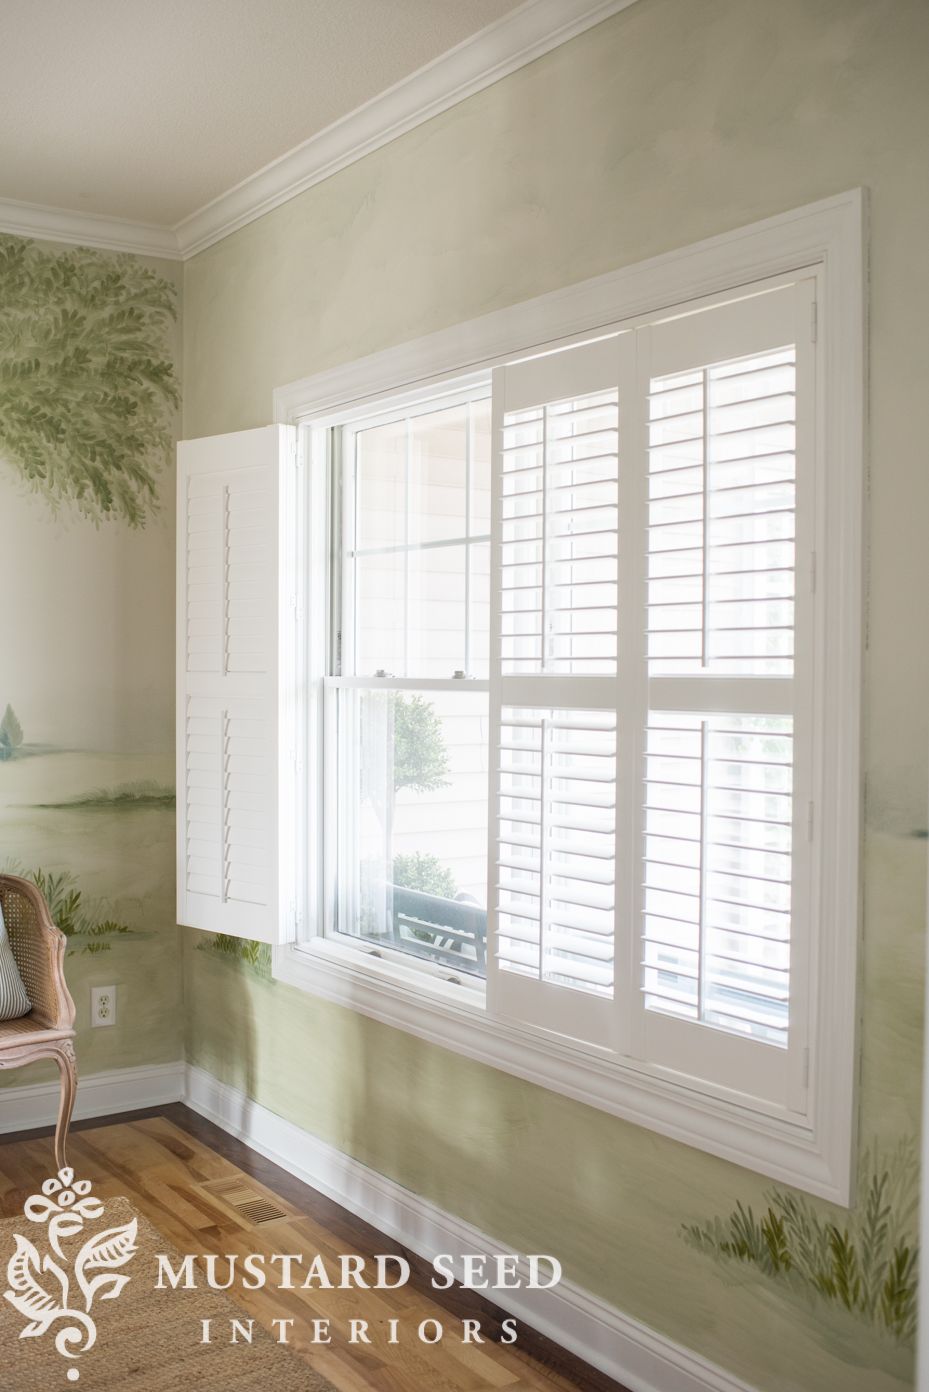 Enchanting Plantation Shutters Ideas That
Perfect For Every Style